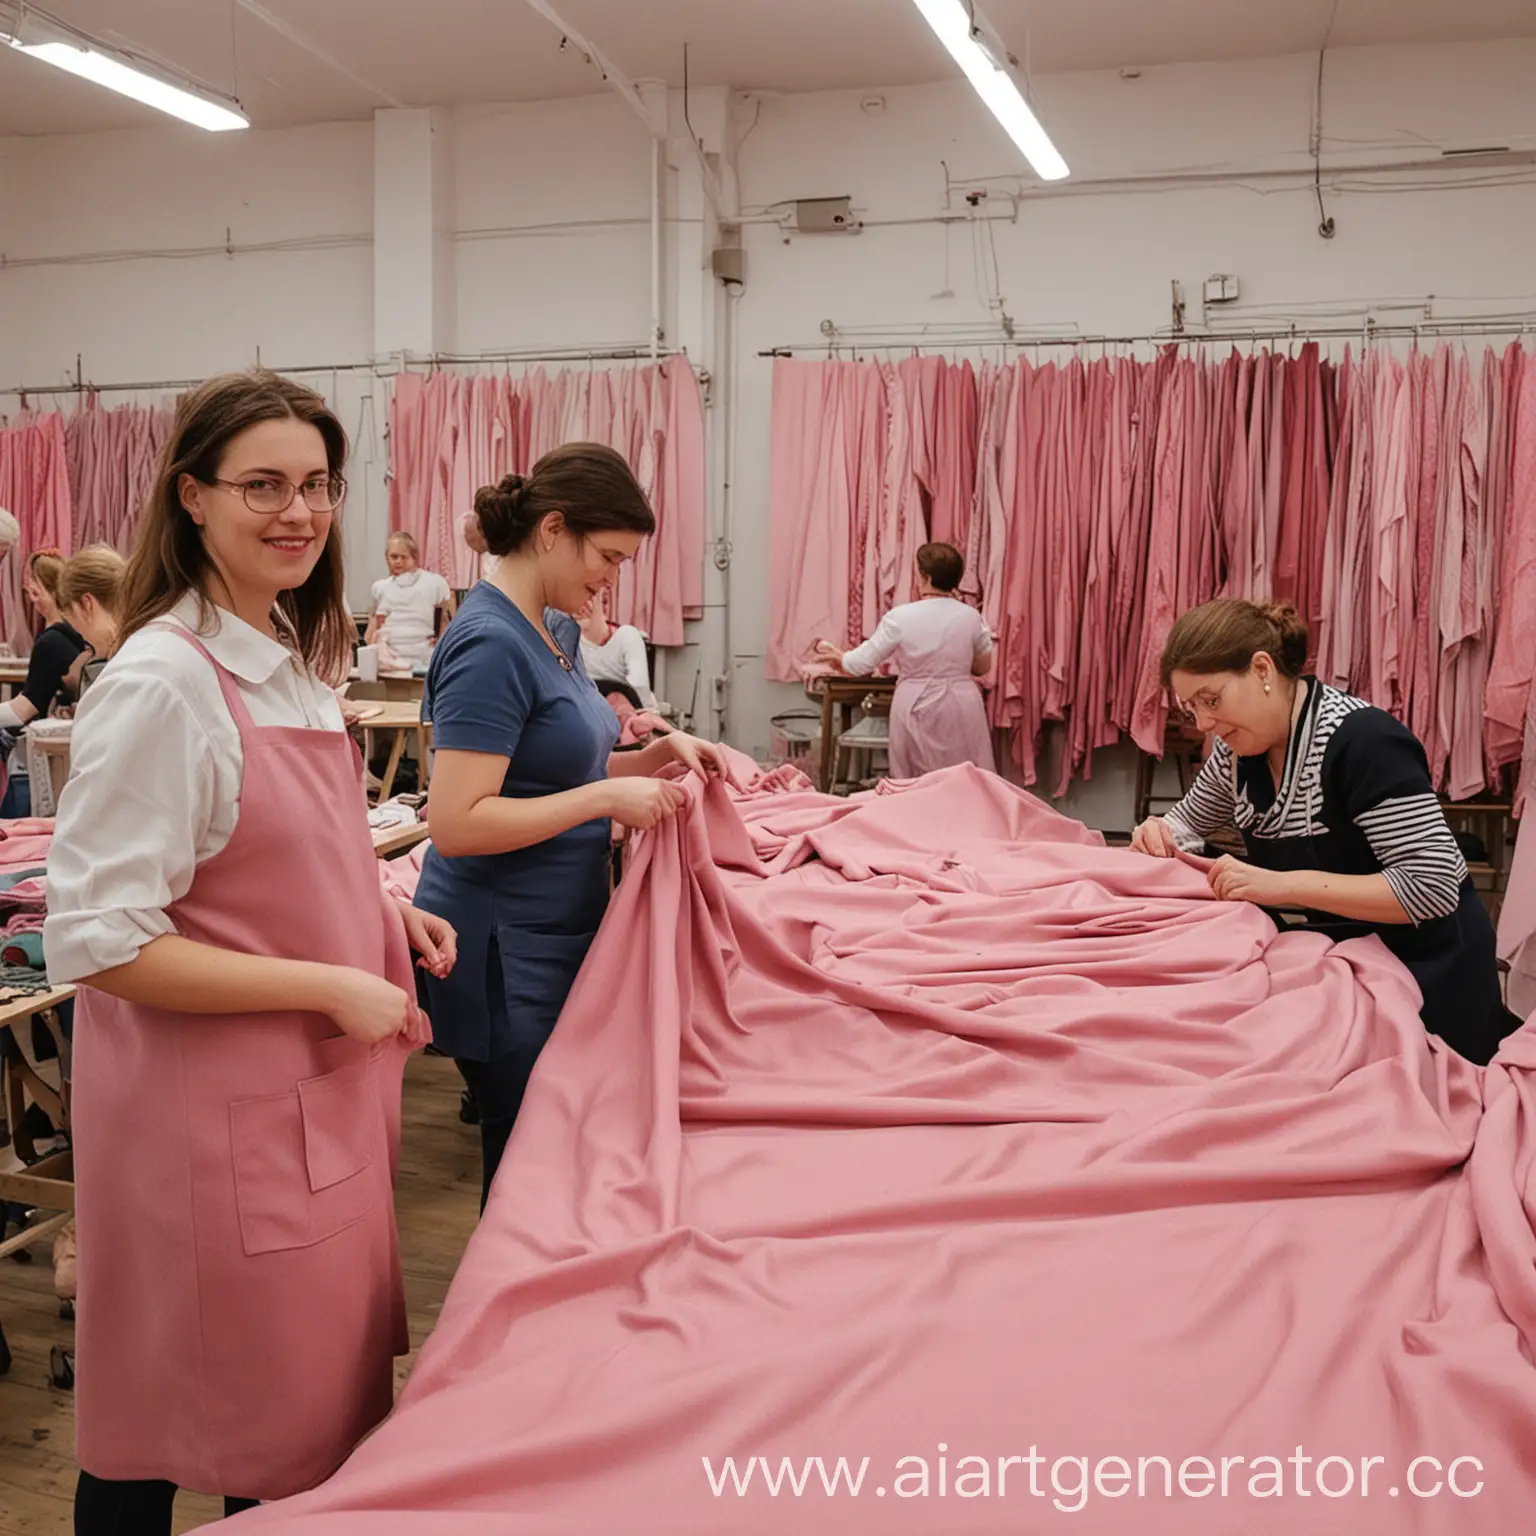 People in the fabric workshop in pink